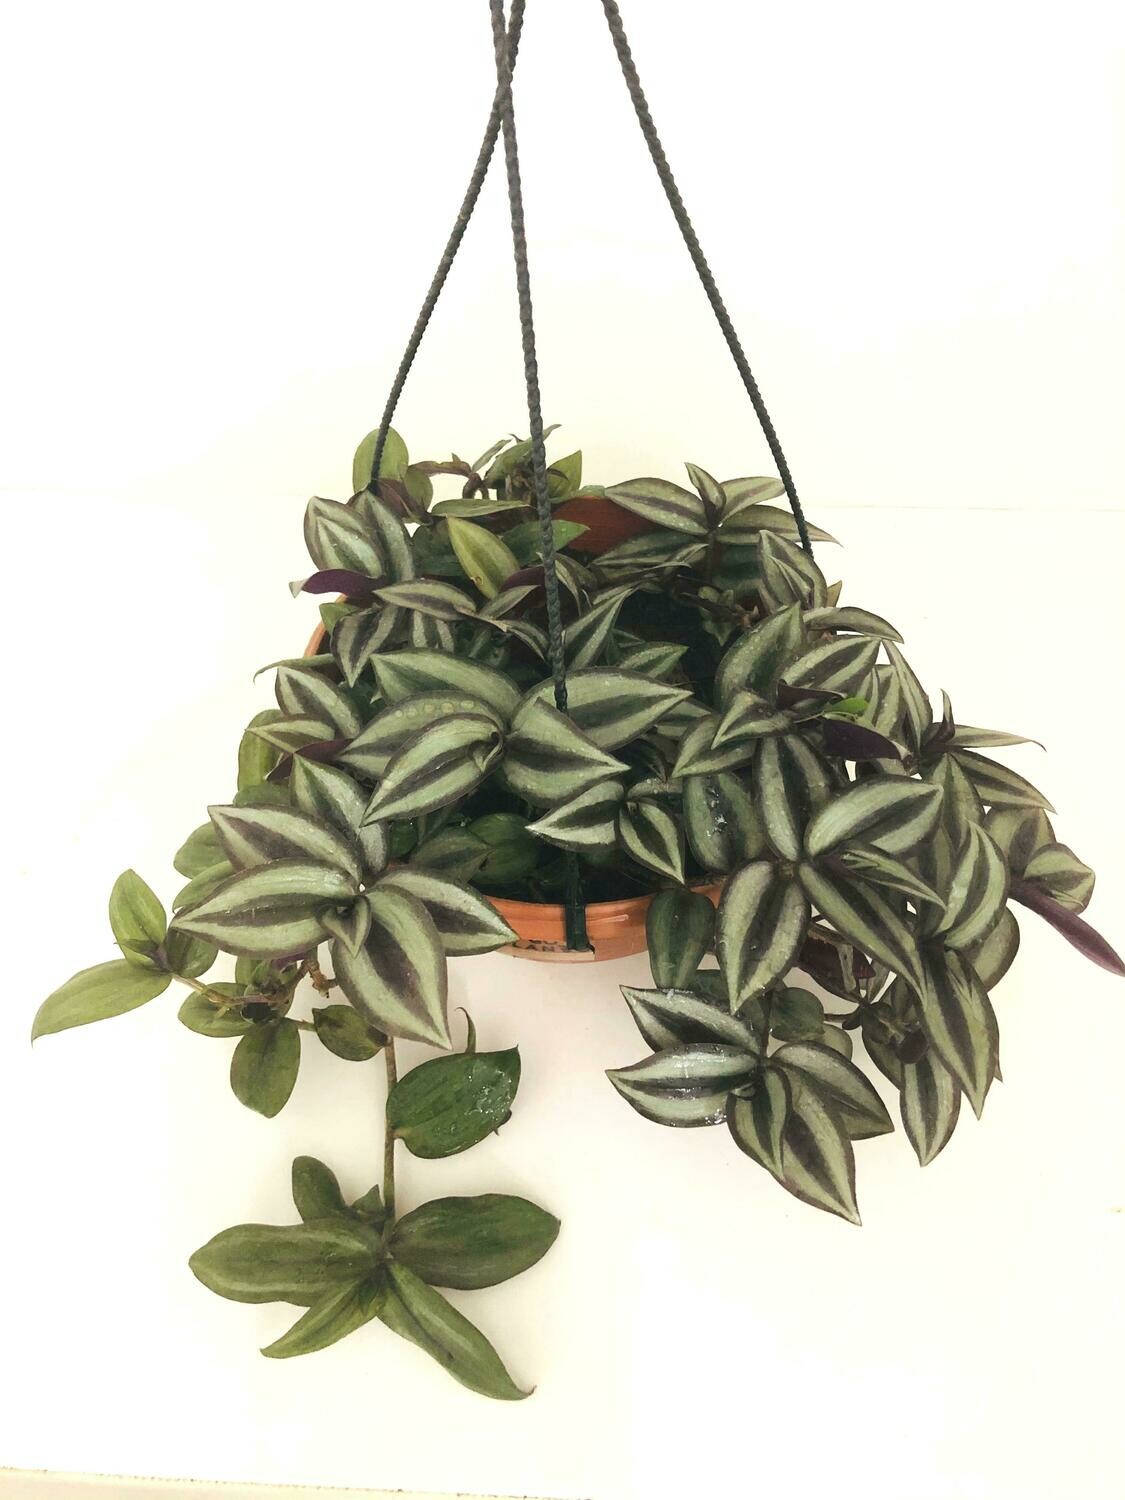 Inch Plant or Wandering Jew Plant in 7 inches Nursery Hanging Basket